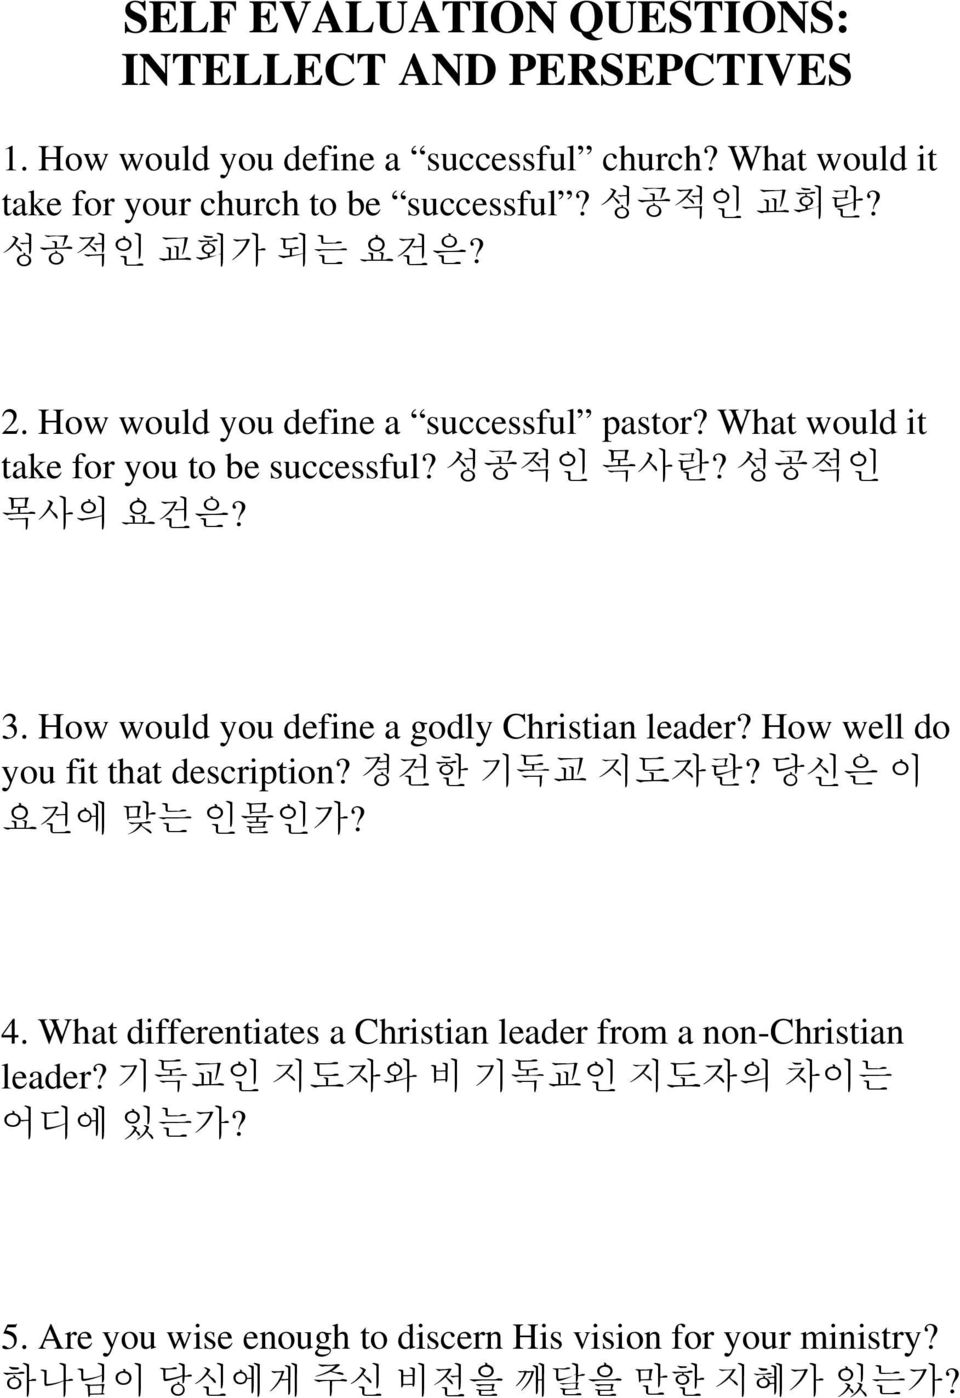 How would you define a godly Christian leader? How well do you fit that description? 경건한 기독교 지도자란? 당신은 이 요건에 맞는 인물인가? 4.